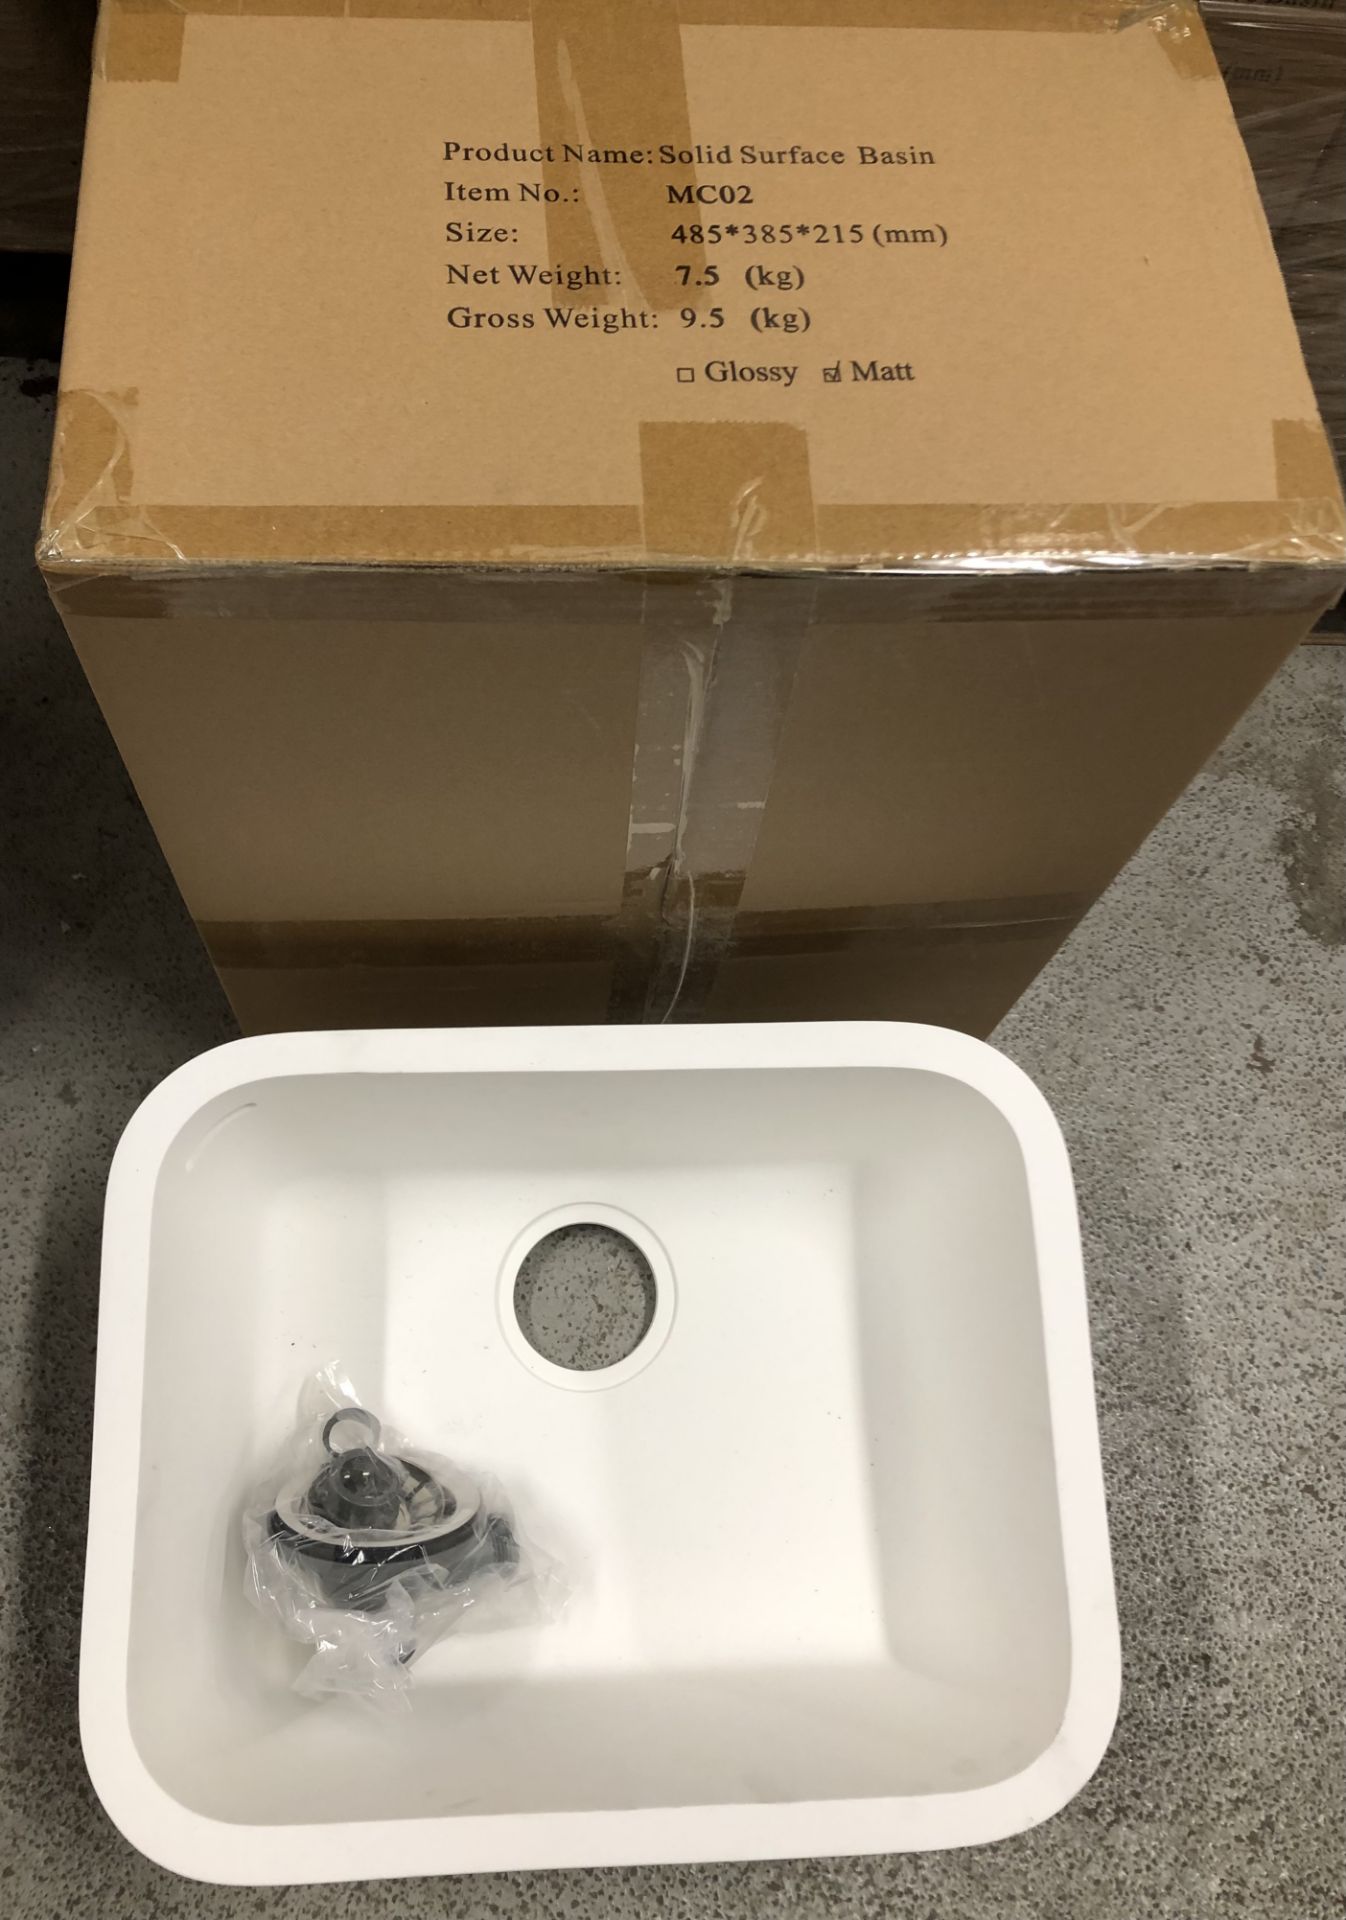 SOLID SURFACE WASH BASIN 485 X 385 X215 (MM) WEIGHT 7. - Image 3 of 3